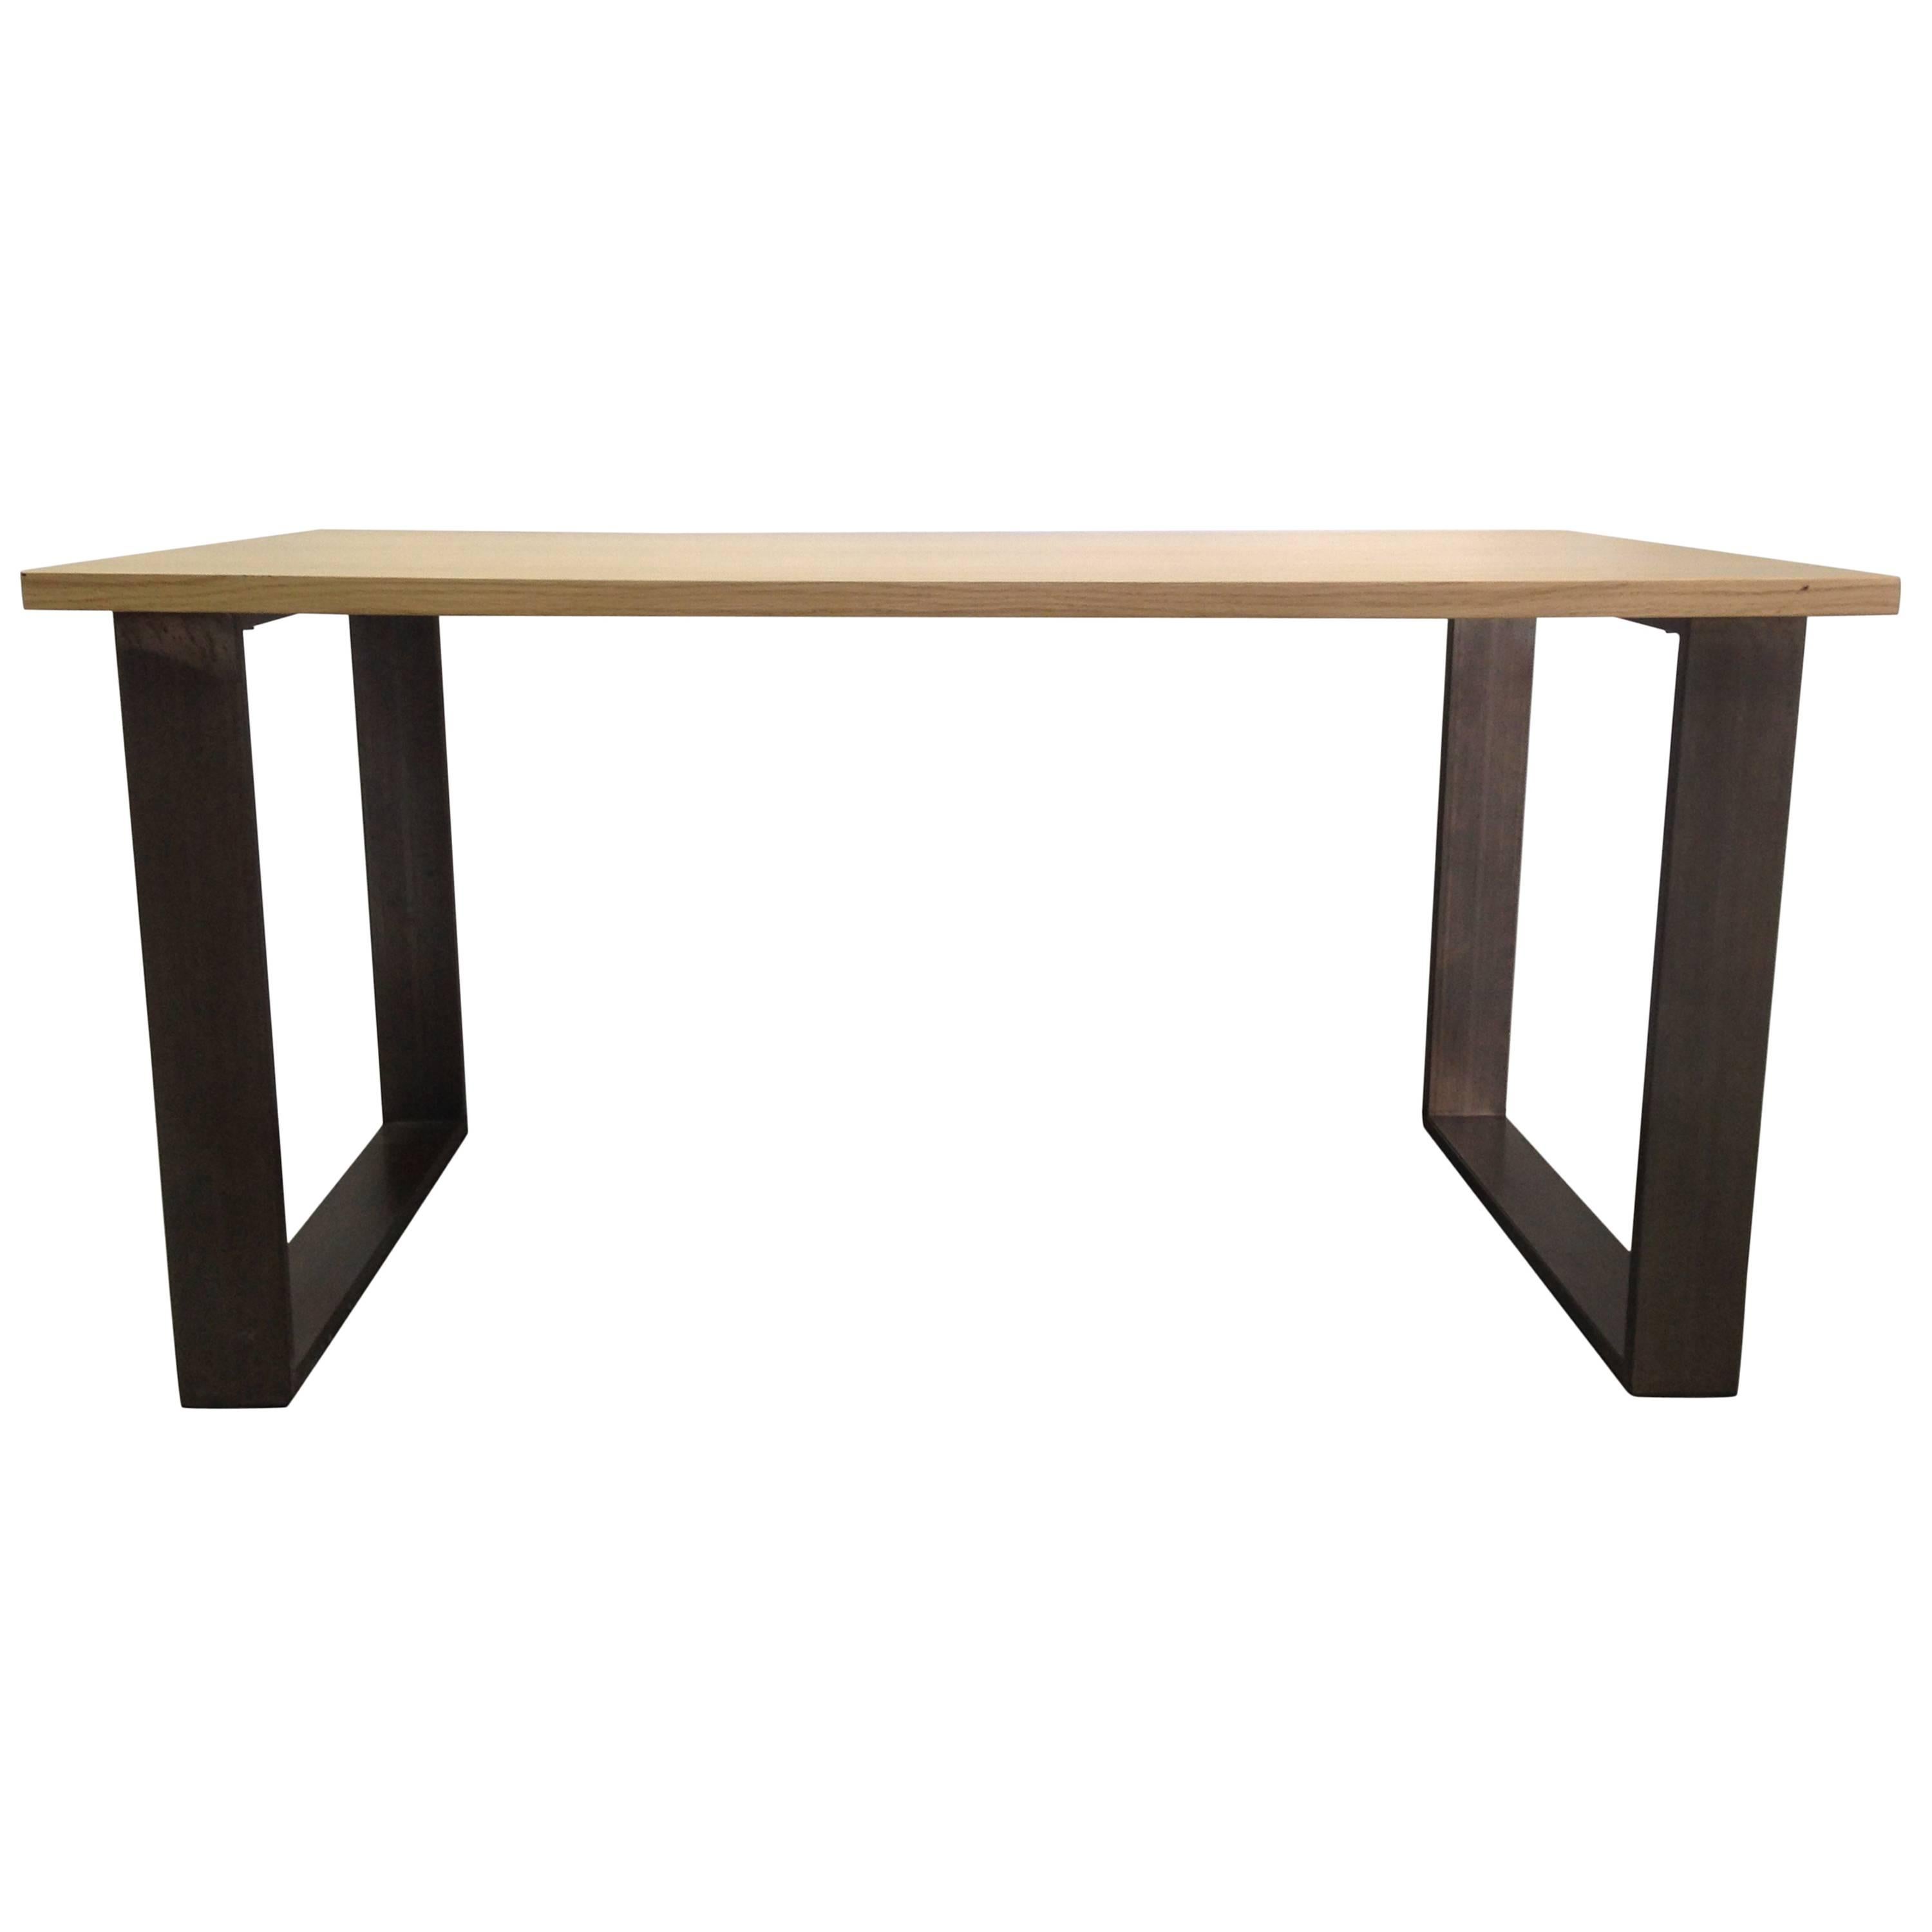 Modern Iron Industrial Table with Wood Top